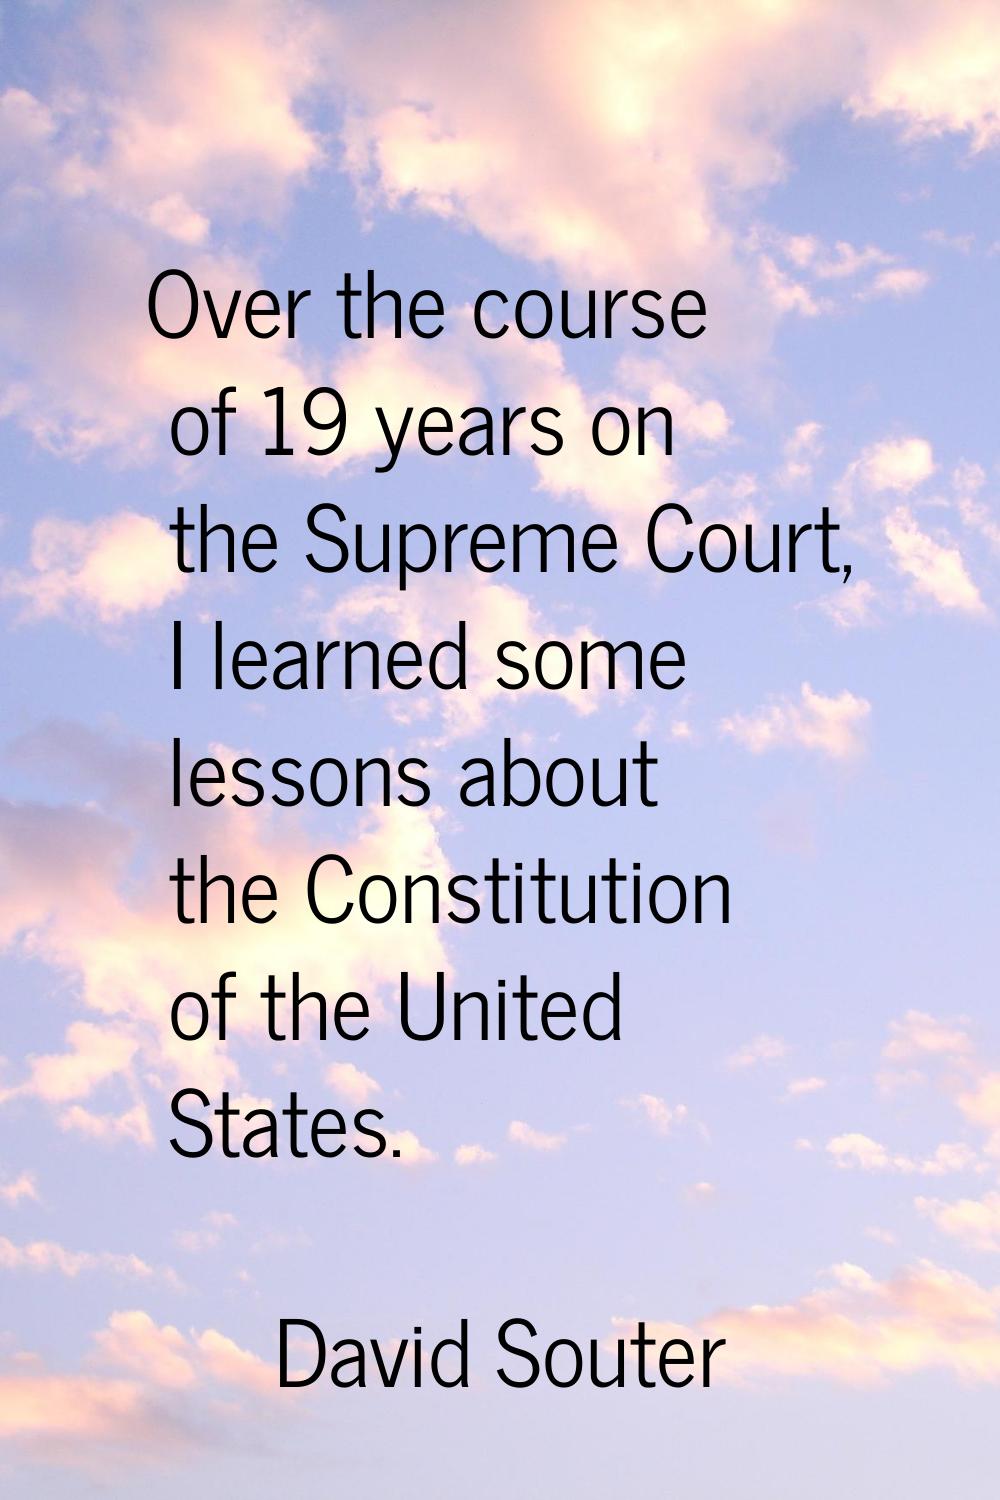 Over the course of 19 years on the Supreme Court, I learned some lessons about the Constitution of 